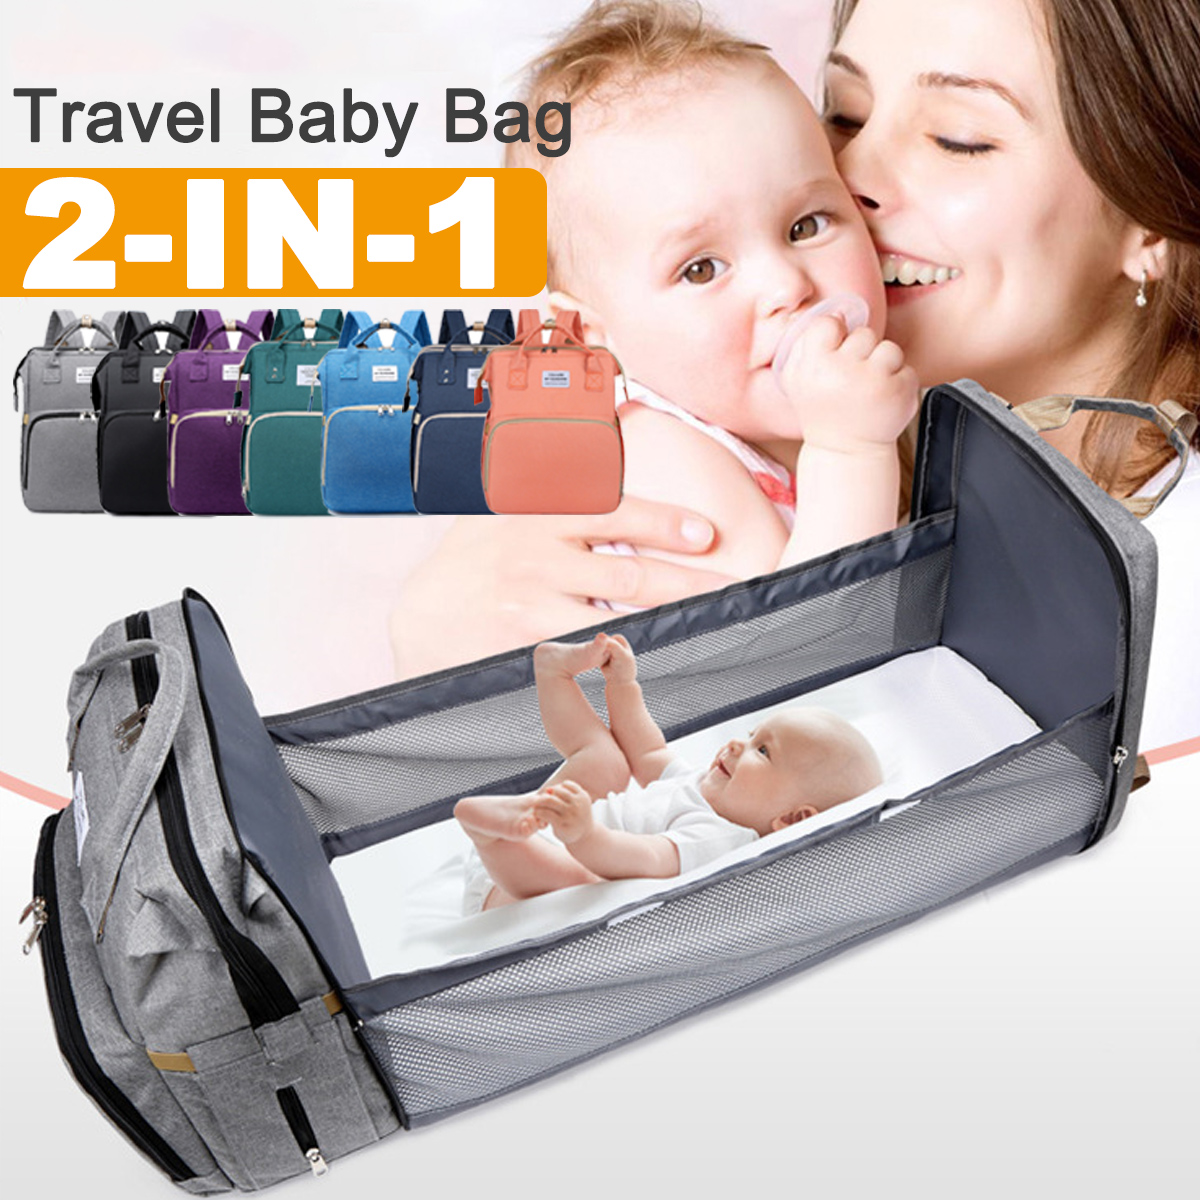 2 IN 1 Foldable Diaper Bag Large Capacity Baby Crib Backpack Nappy Mummy Bags For Mom Outdoors Travel